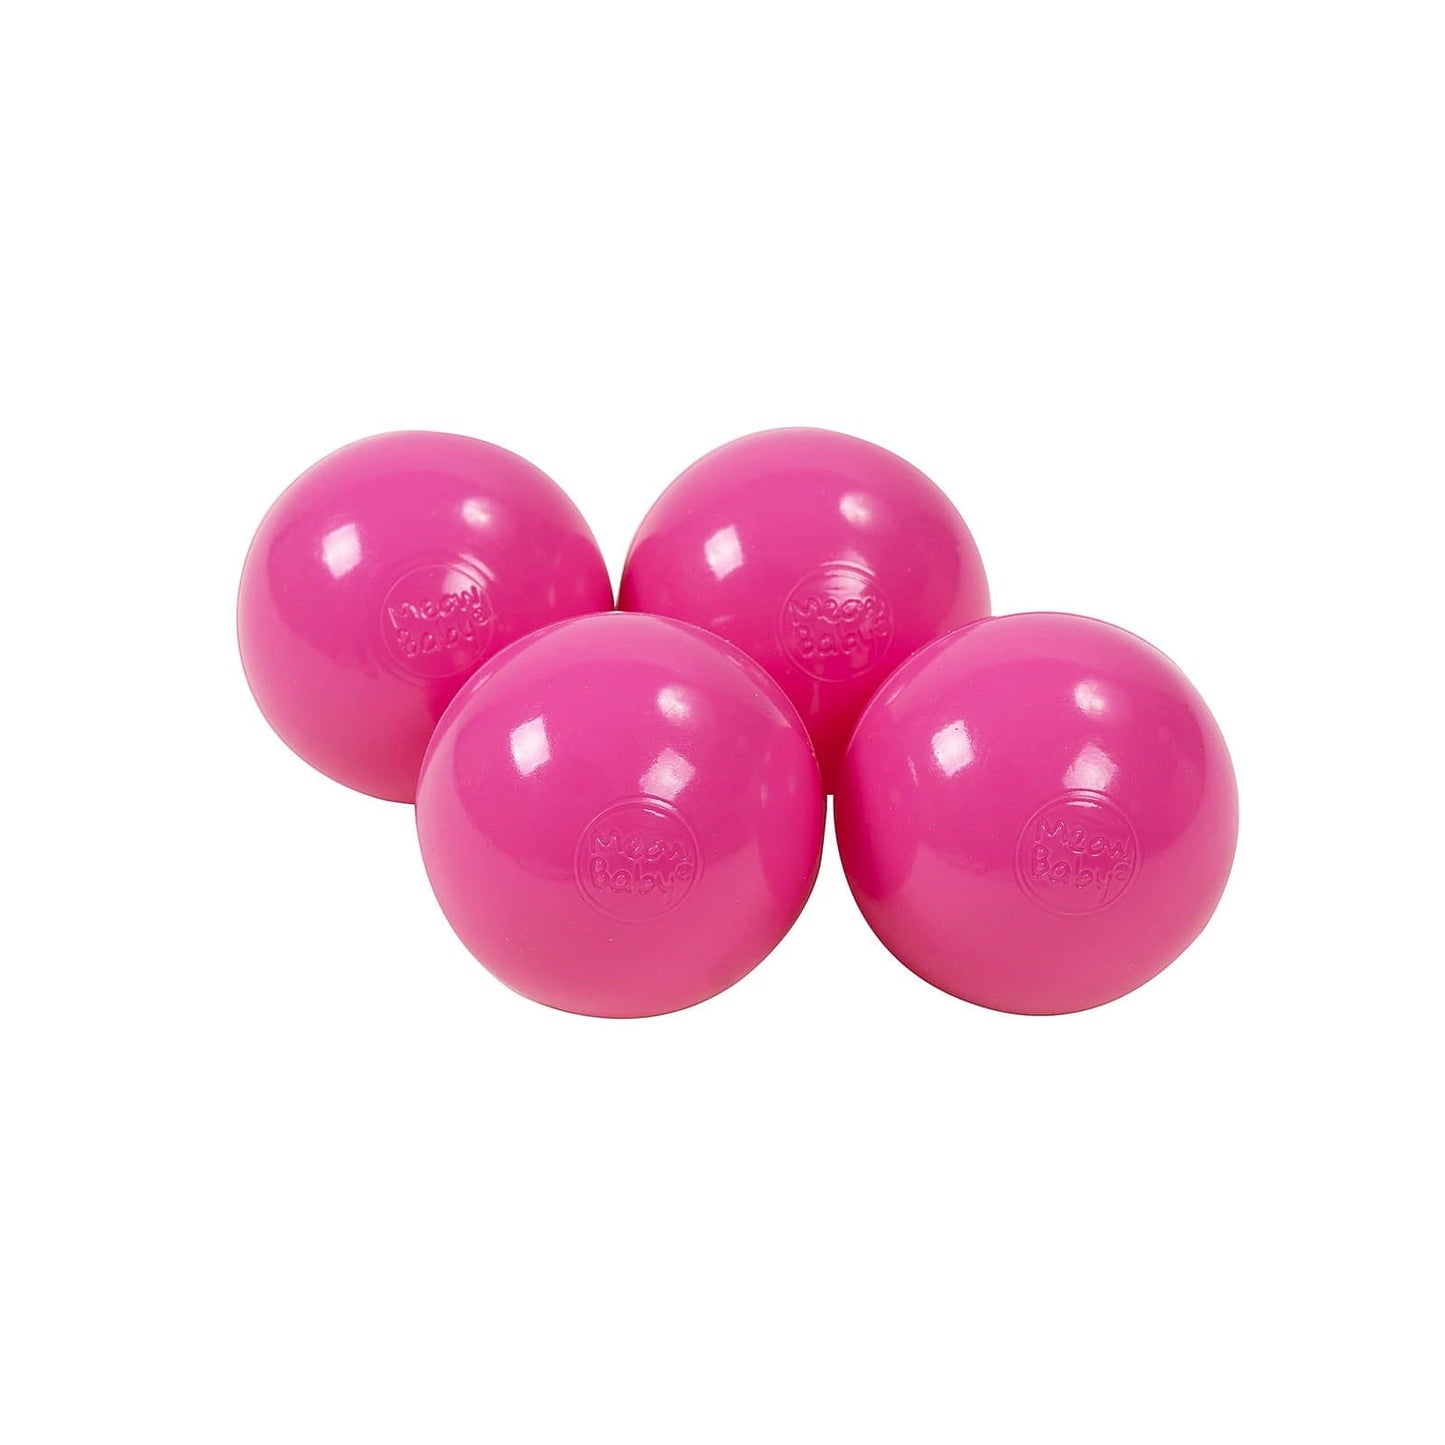 Soft CE Certified Plastic Balls For Kids By MeowBaby - Stylemykid.com